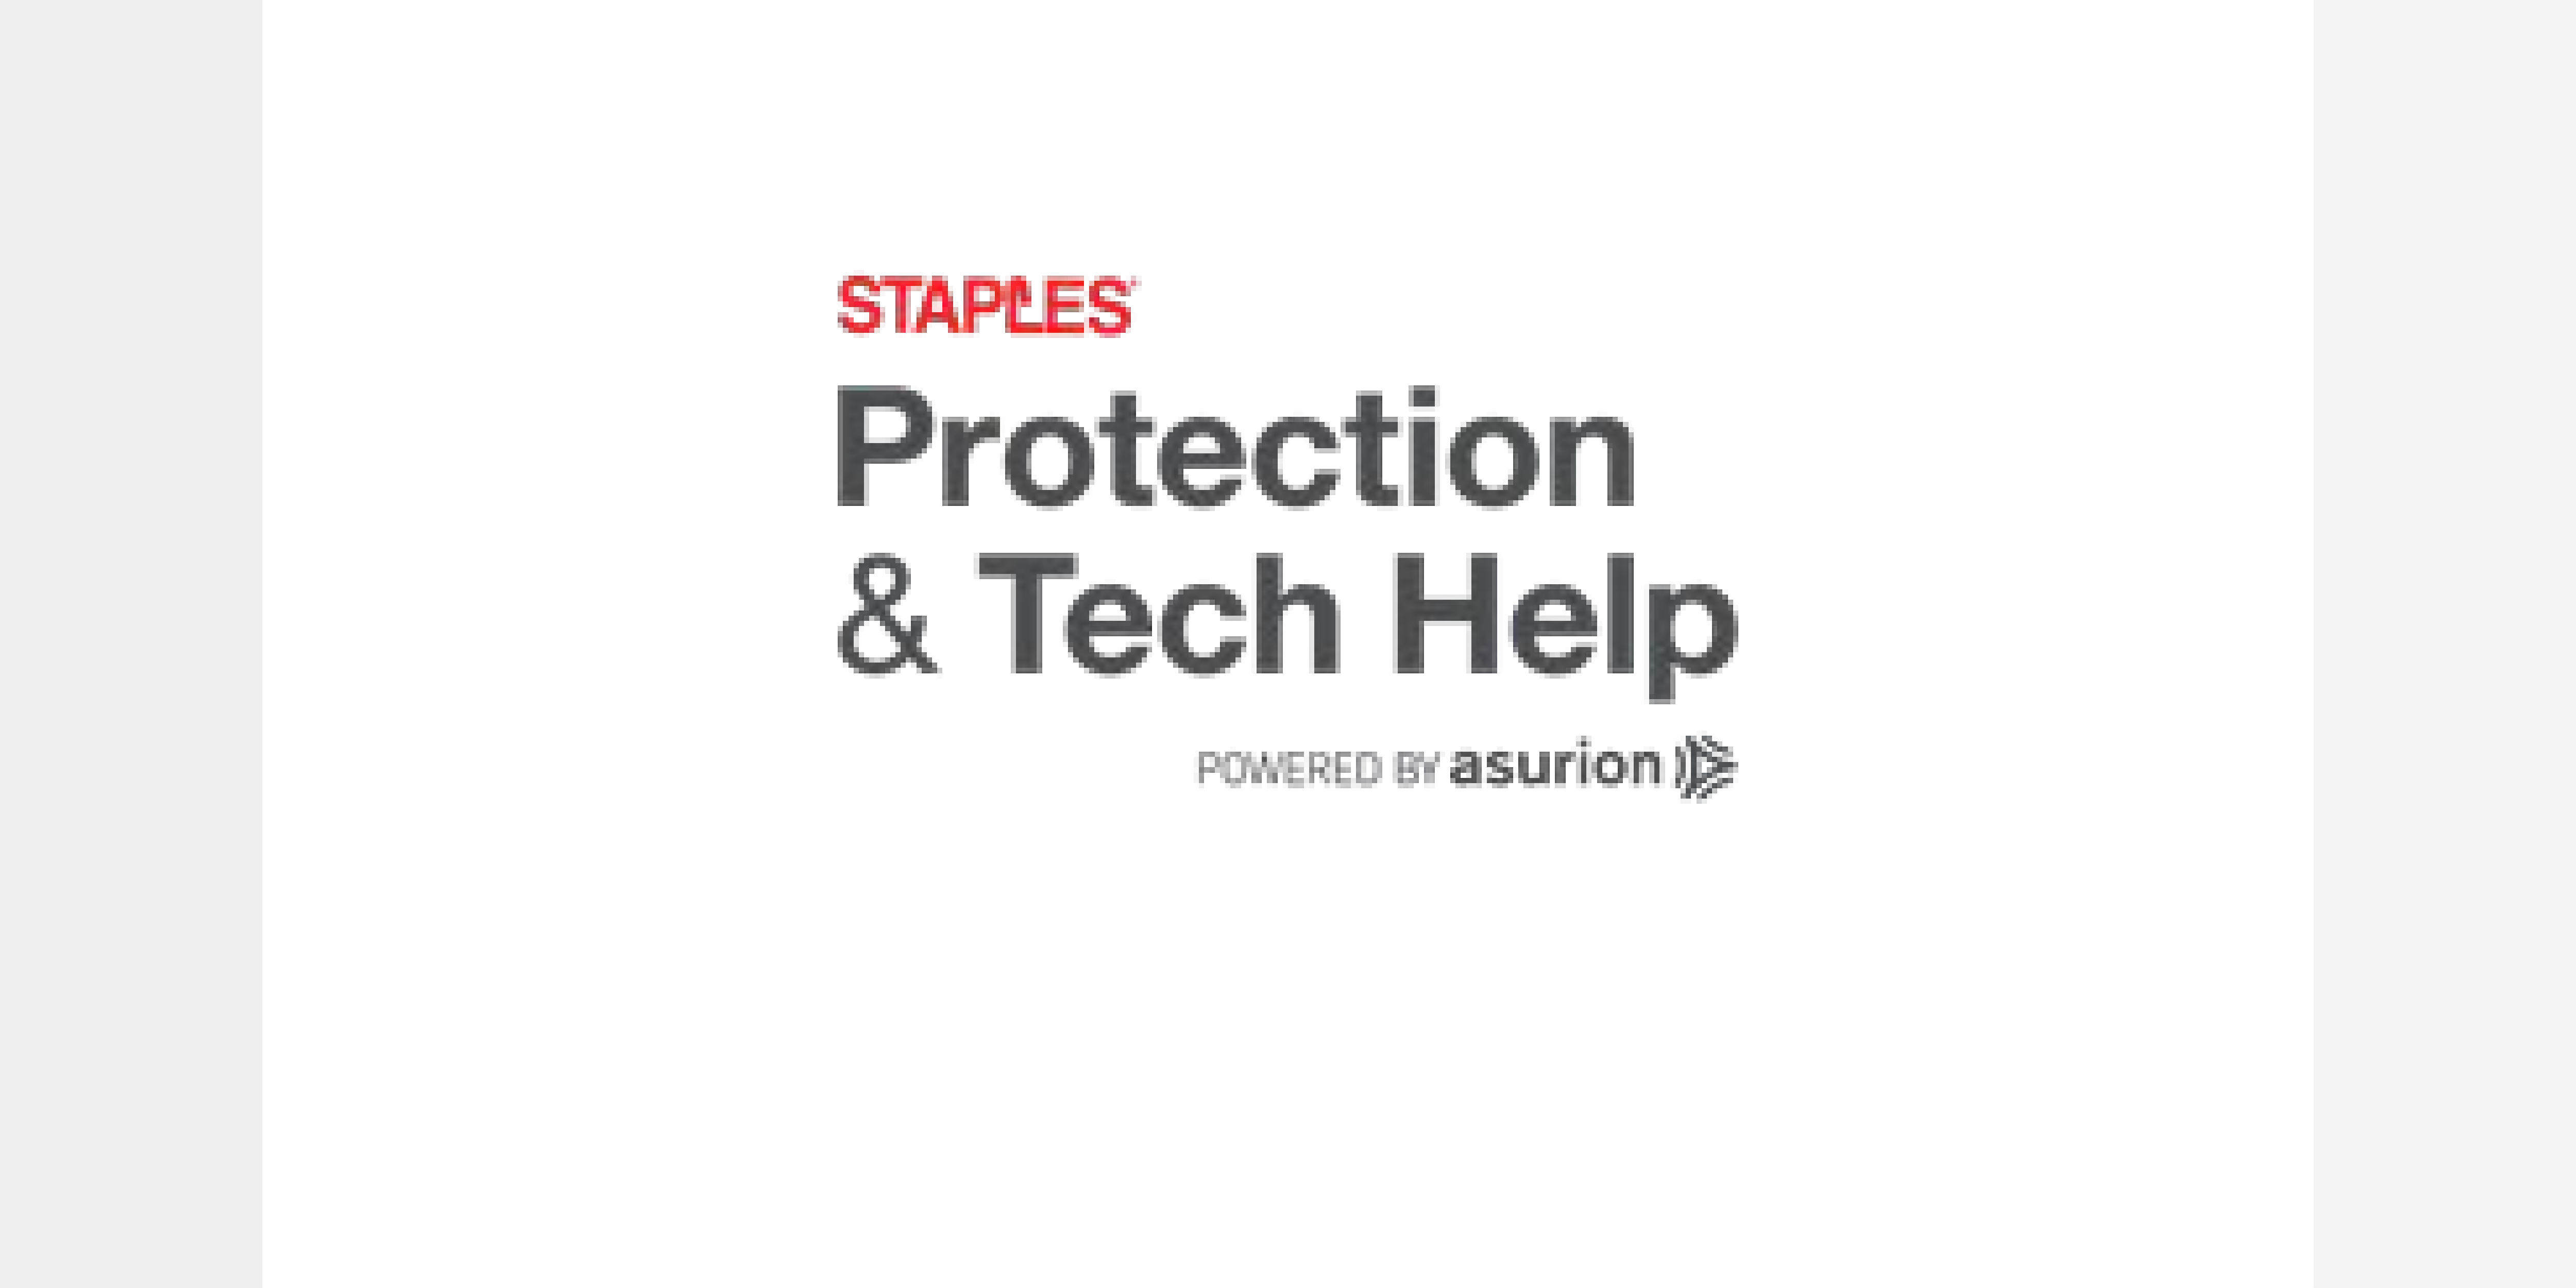 Asurion Teams Up with Staples to Help Customers Get More from Their Tech :  Greater Nashville Tech Council